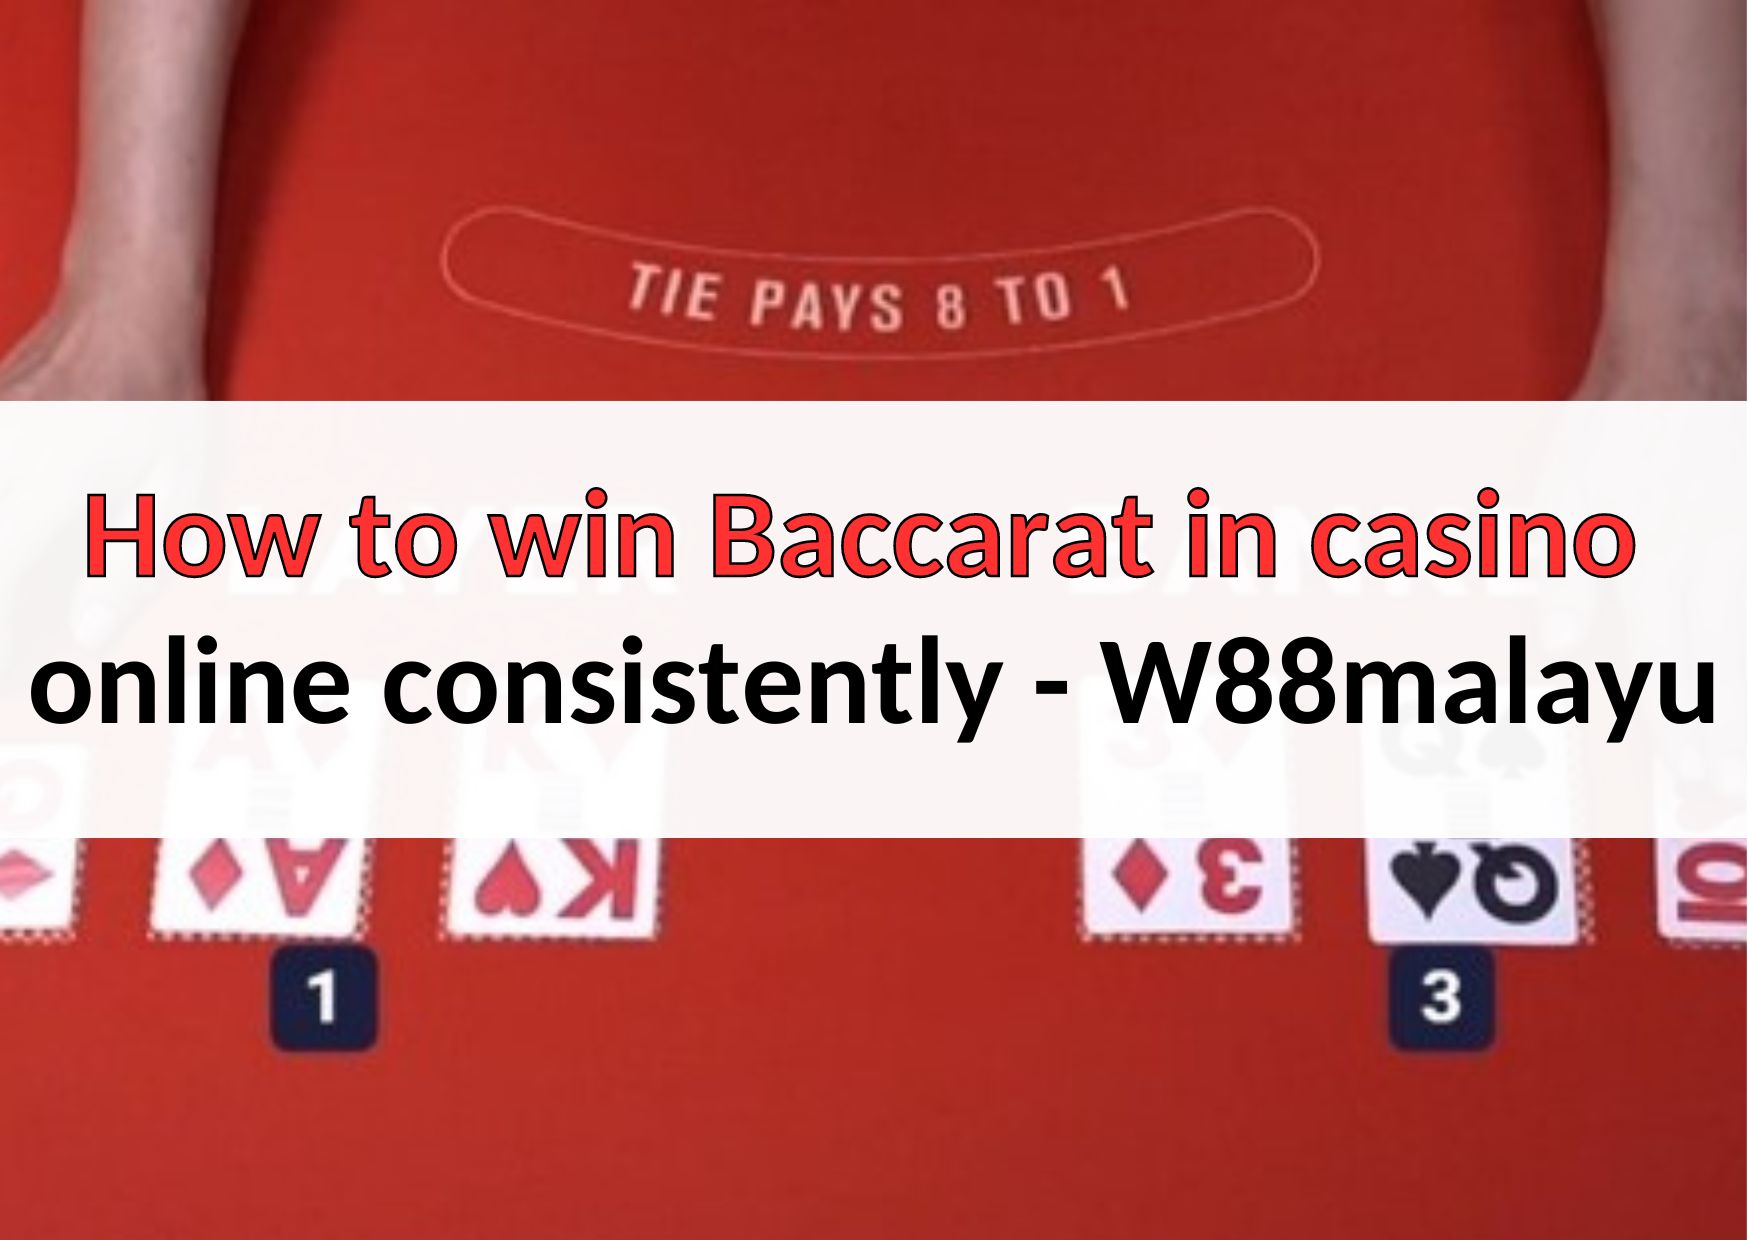 how-to-win-baccarat-in-casino-1